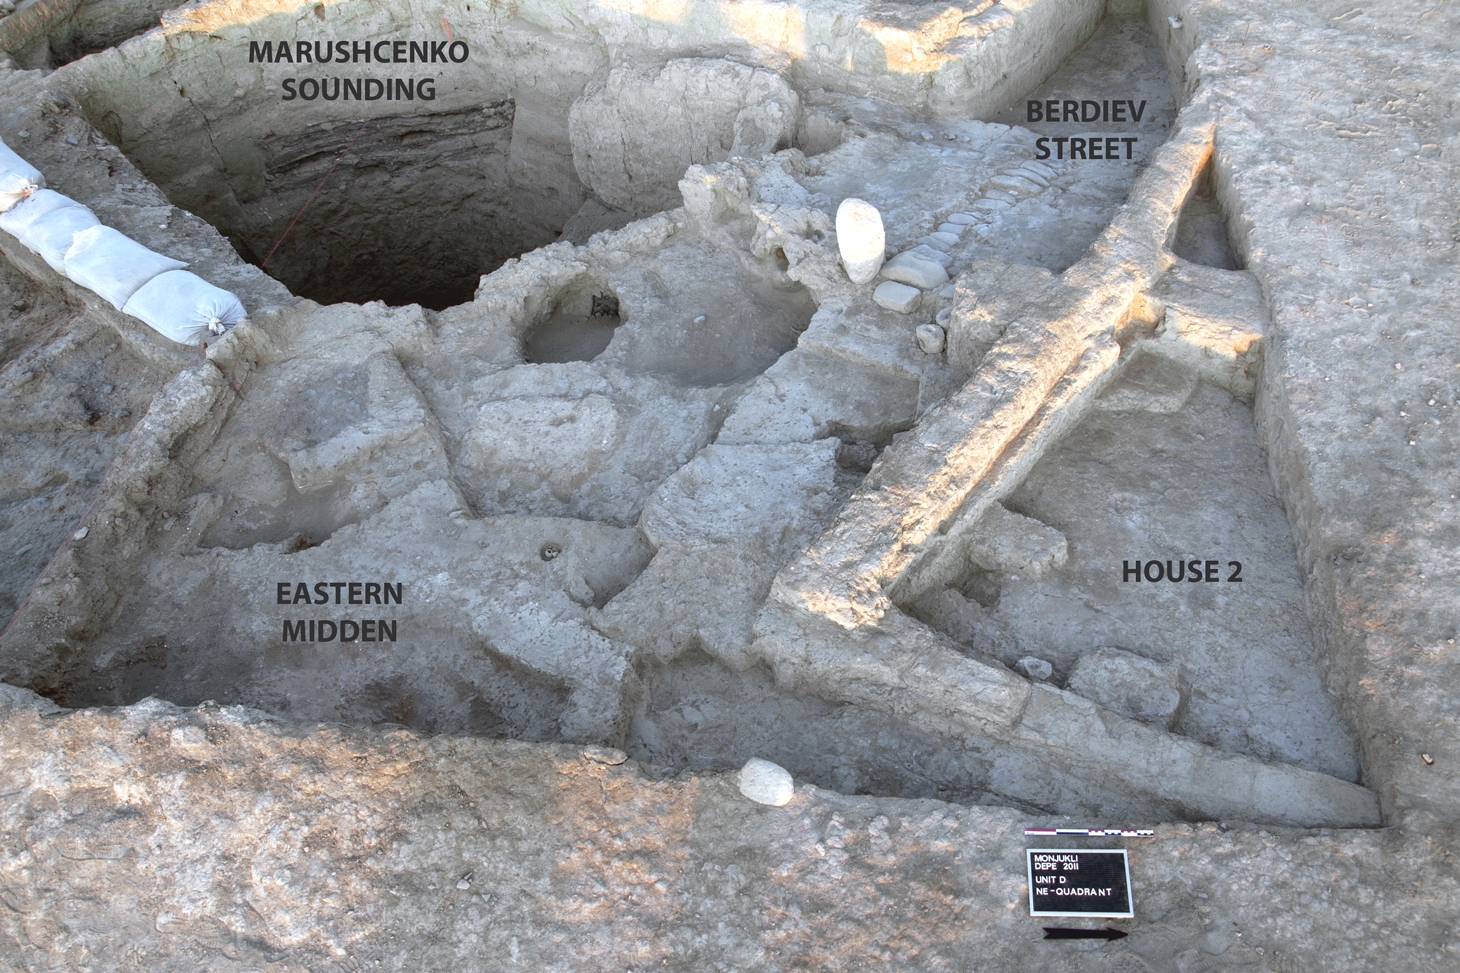 Juxtaposition of architecture and features in Unit D at the close of the 2011 excavation season. The paved section of Berdiev Street ended at Gate 1, marked by a large standing limestone boulder. On the opposite side of the gate is the Eastern Midden. House 2 borders directly on Berdiev Street to the north. The sounding excavated by A. Marushchenko in 1959 cut into the midden as well as into architecture to the south (left side of the photo).